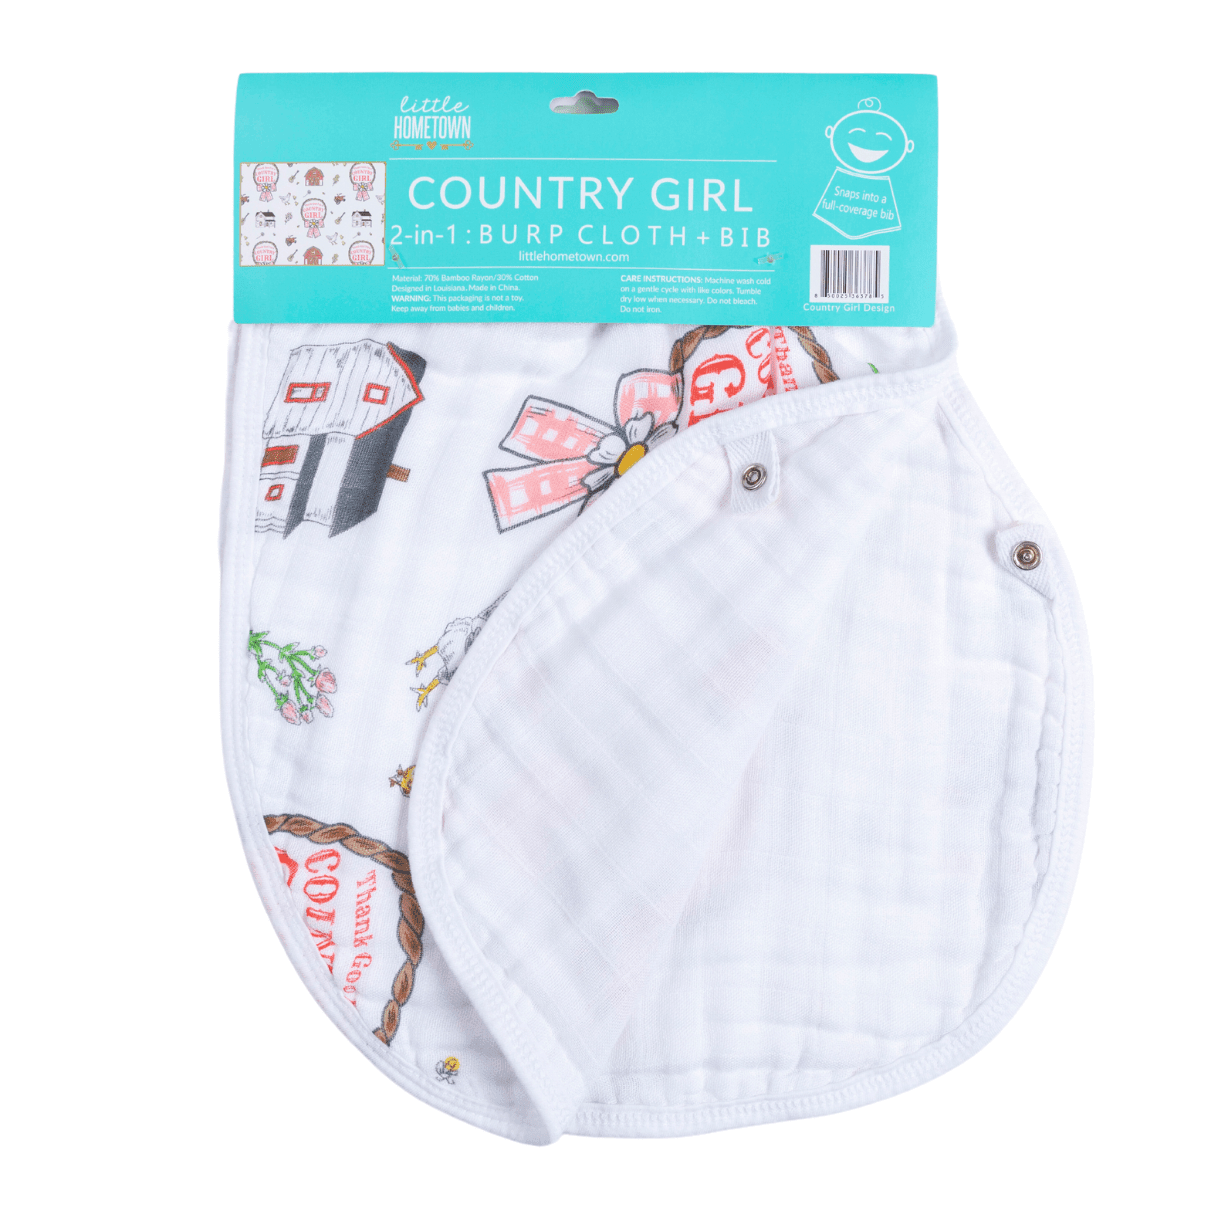 Country Girl 2-in-1 burp cloth and bib combo with floral and gingham patterns, featuring a cute cowgirl design.